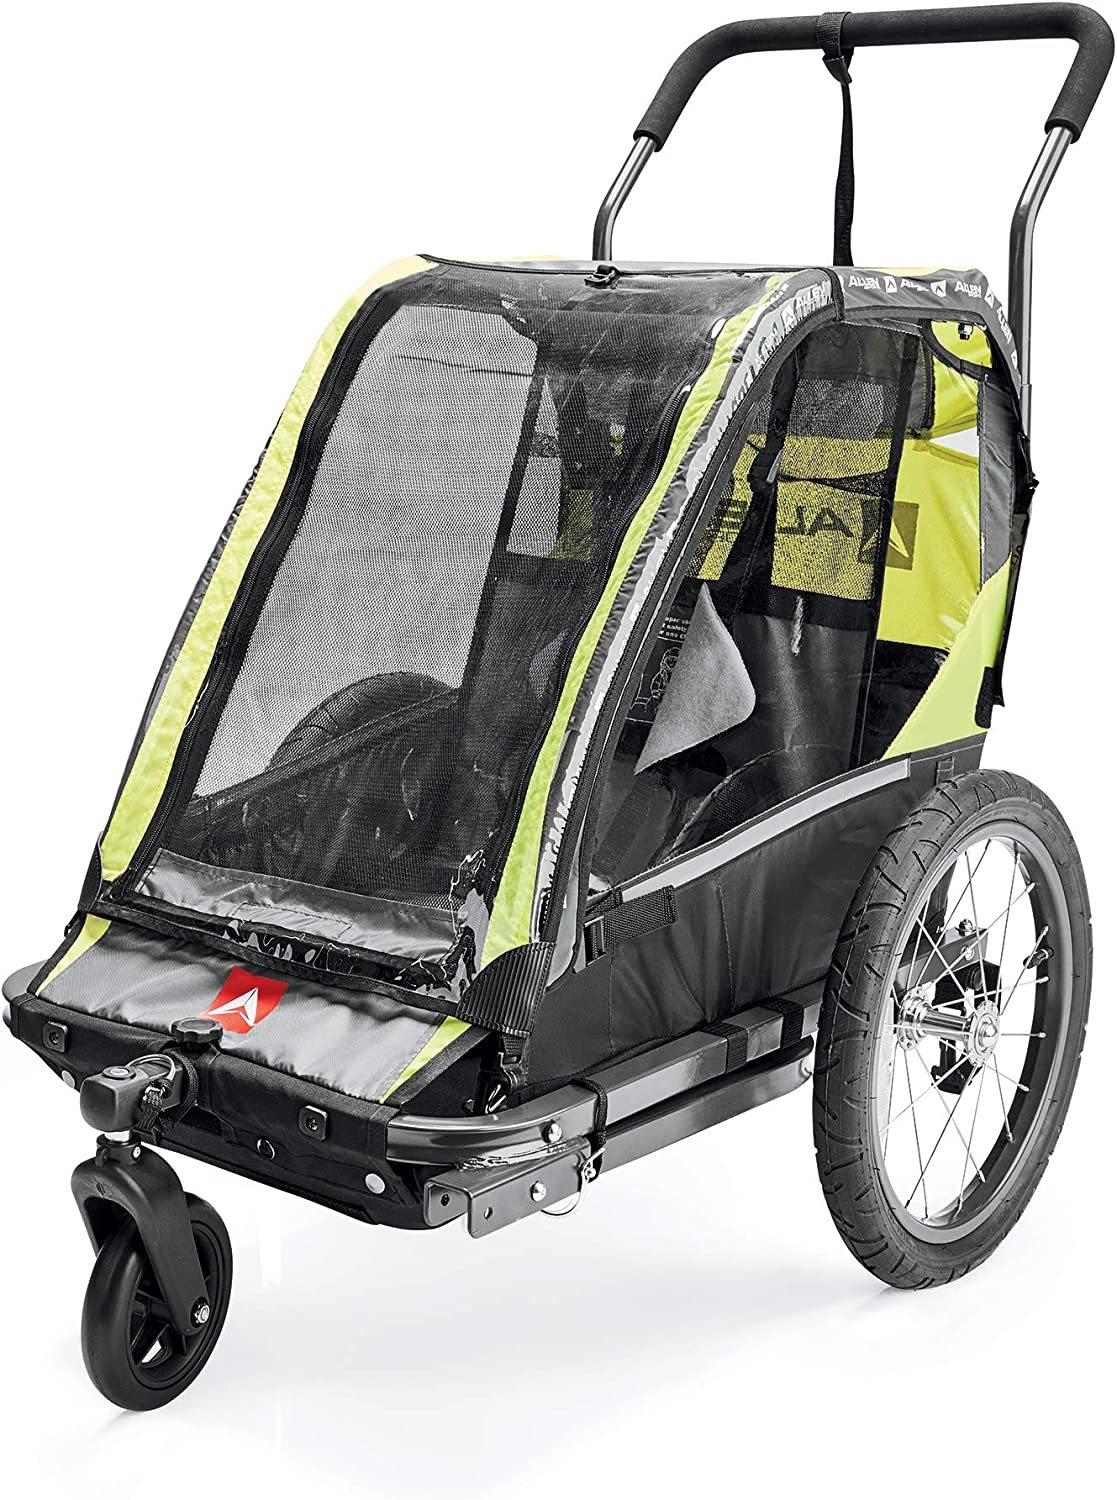 Primary image for Deluxe Bike Trailer And Stroller From Allen Sports.